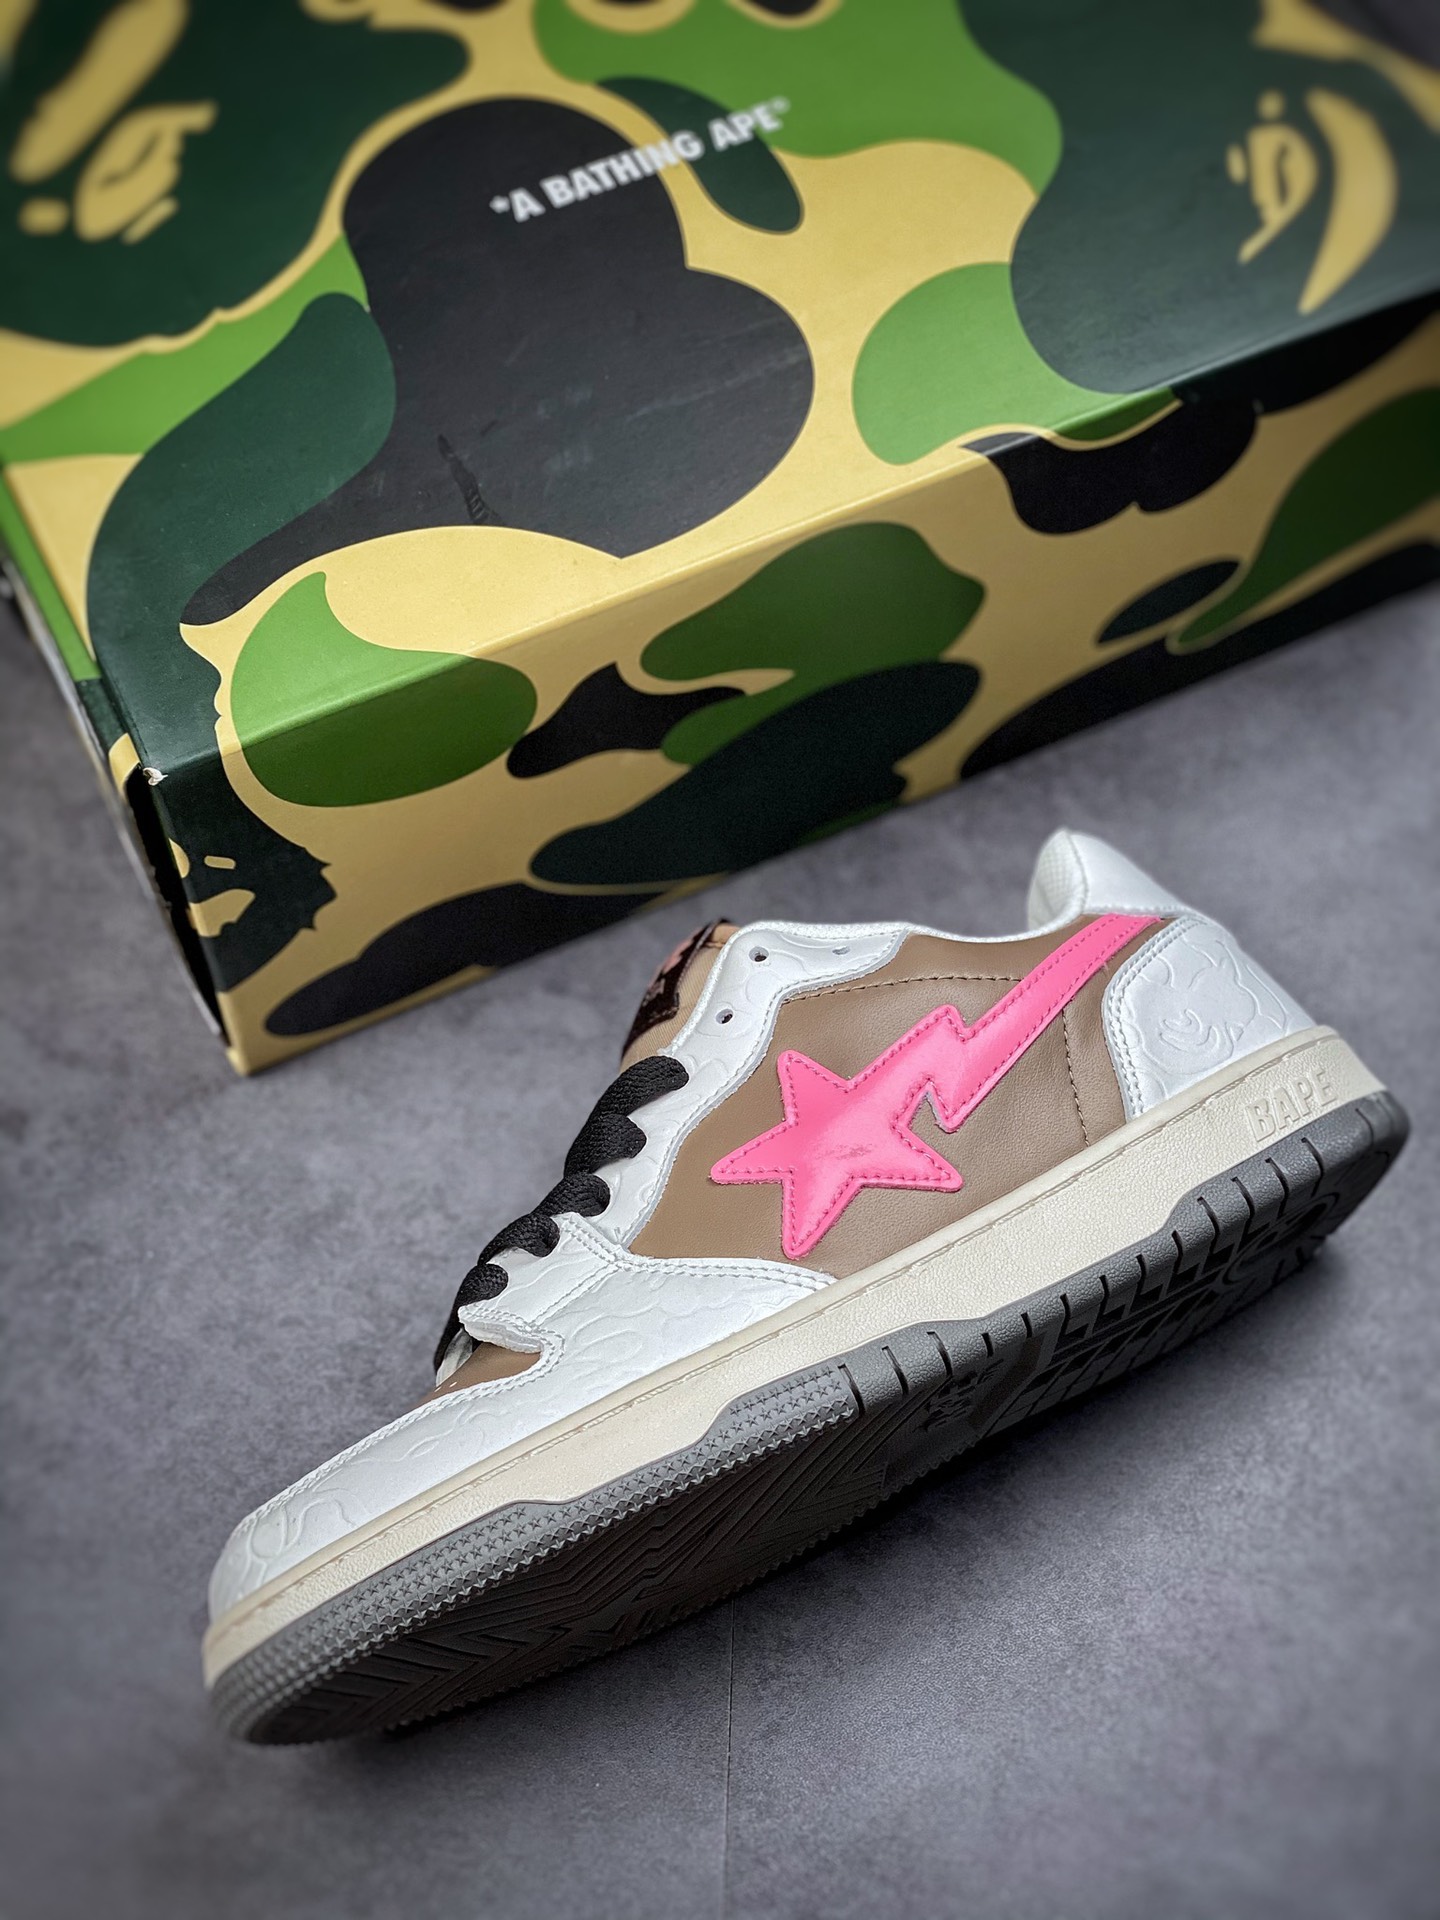 A Bathing Ape BAPE Sk8 Sta series low-top casual sports skateboard shoes